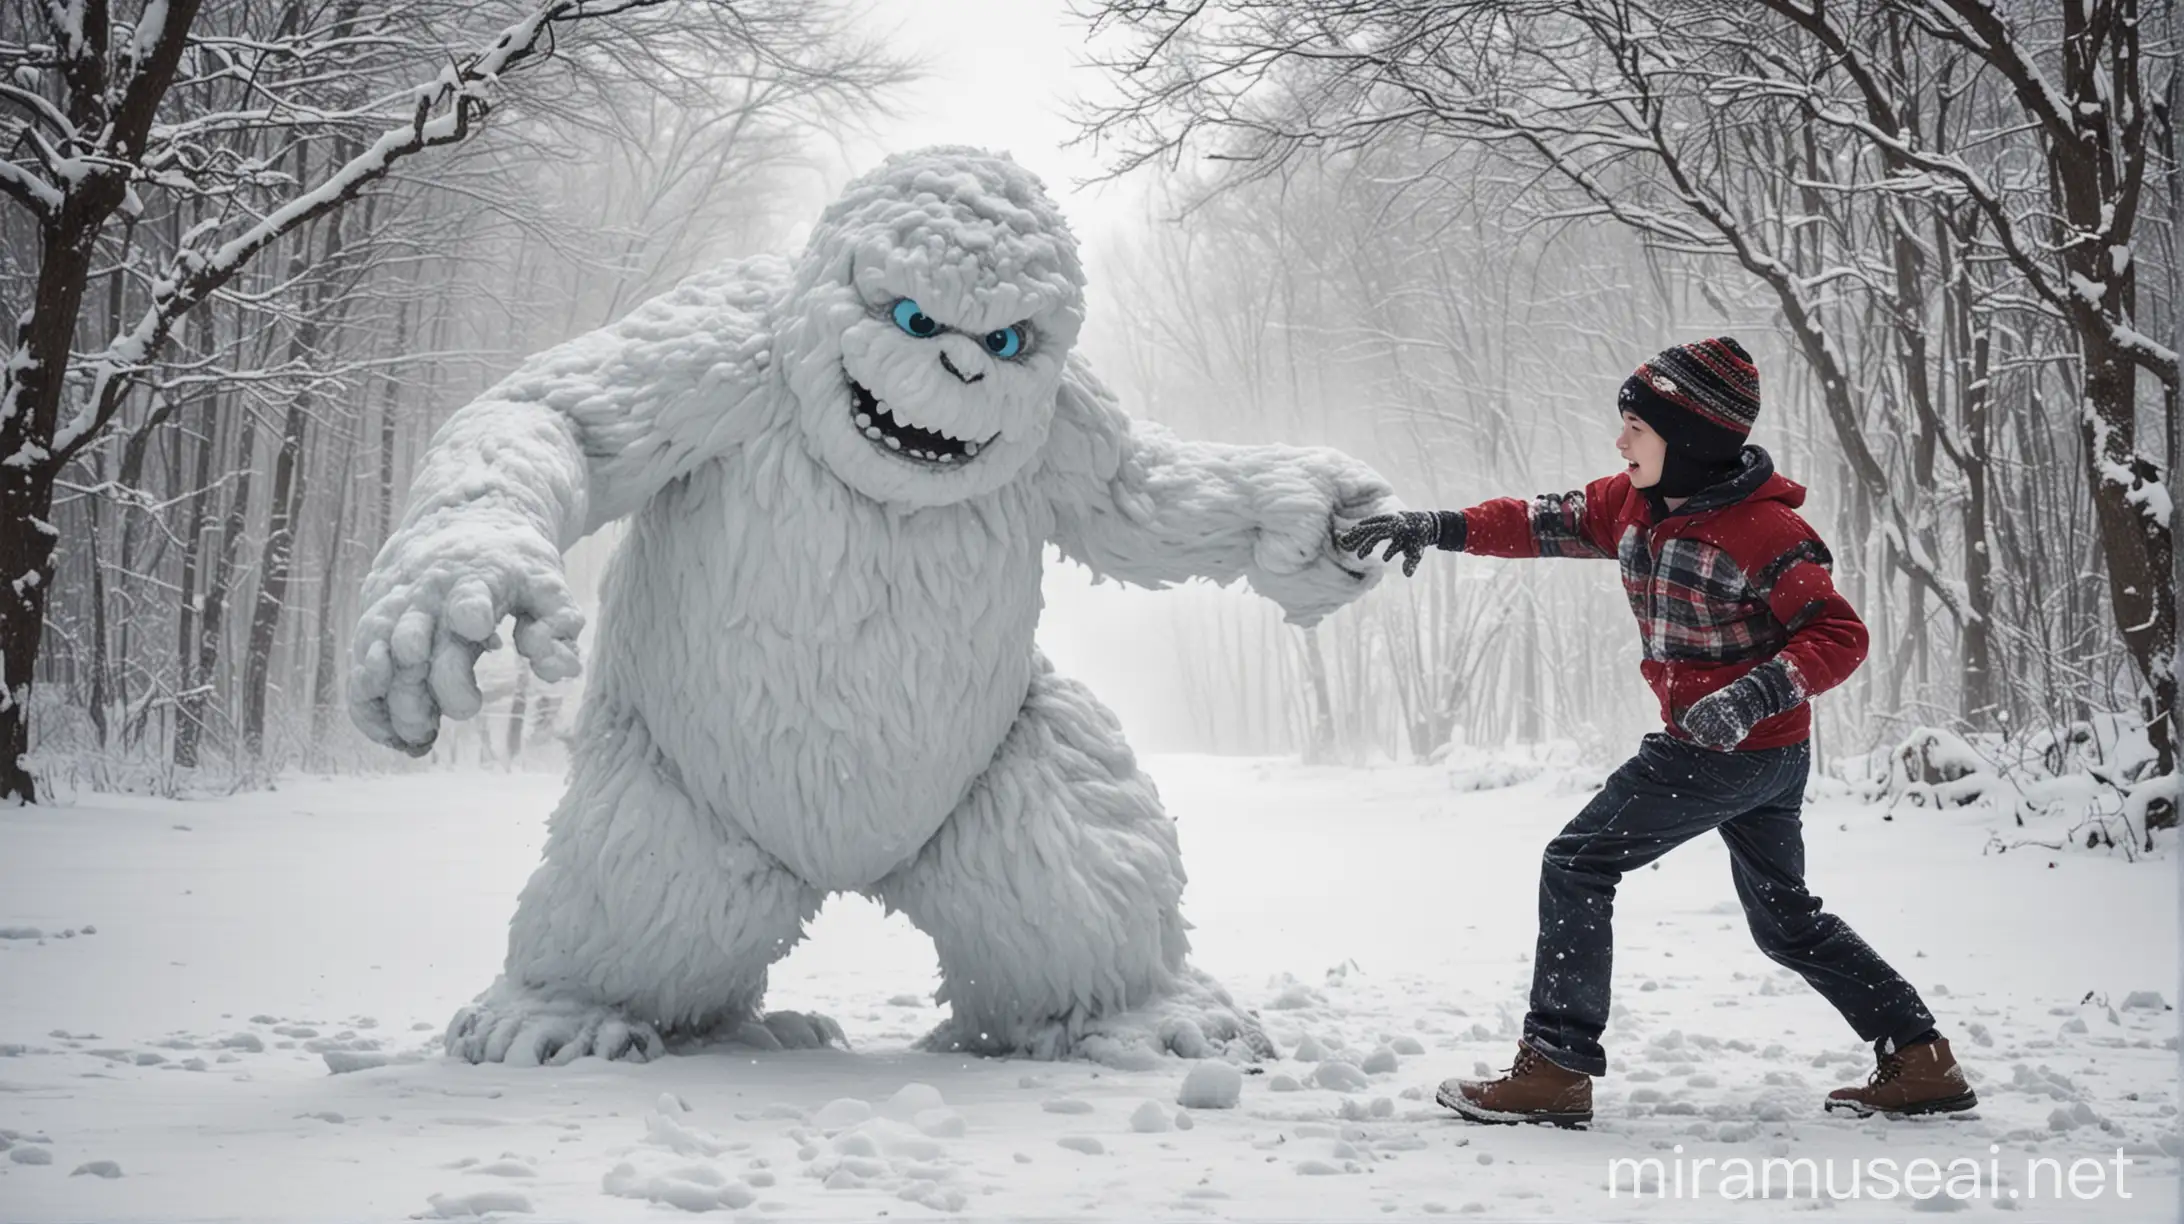 A boy fight with a snow monster